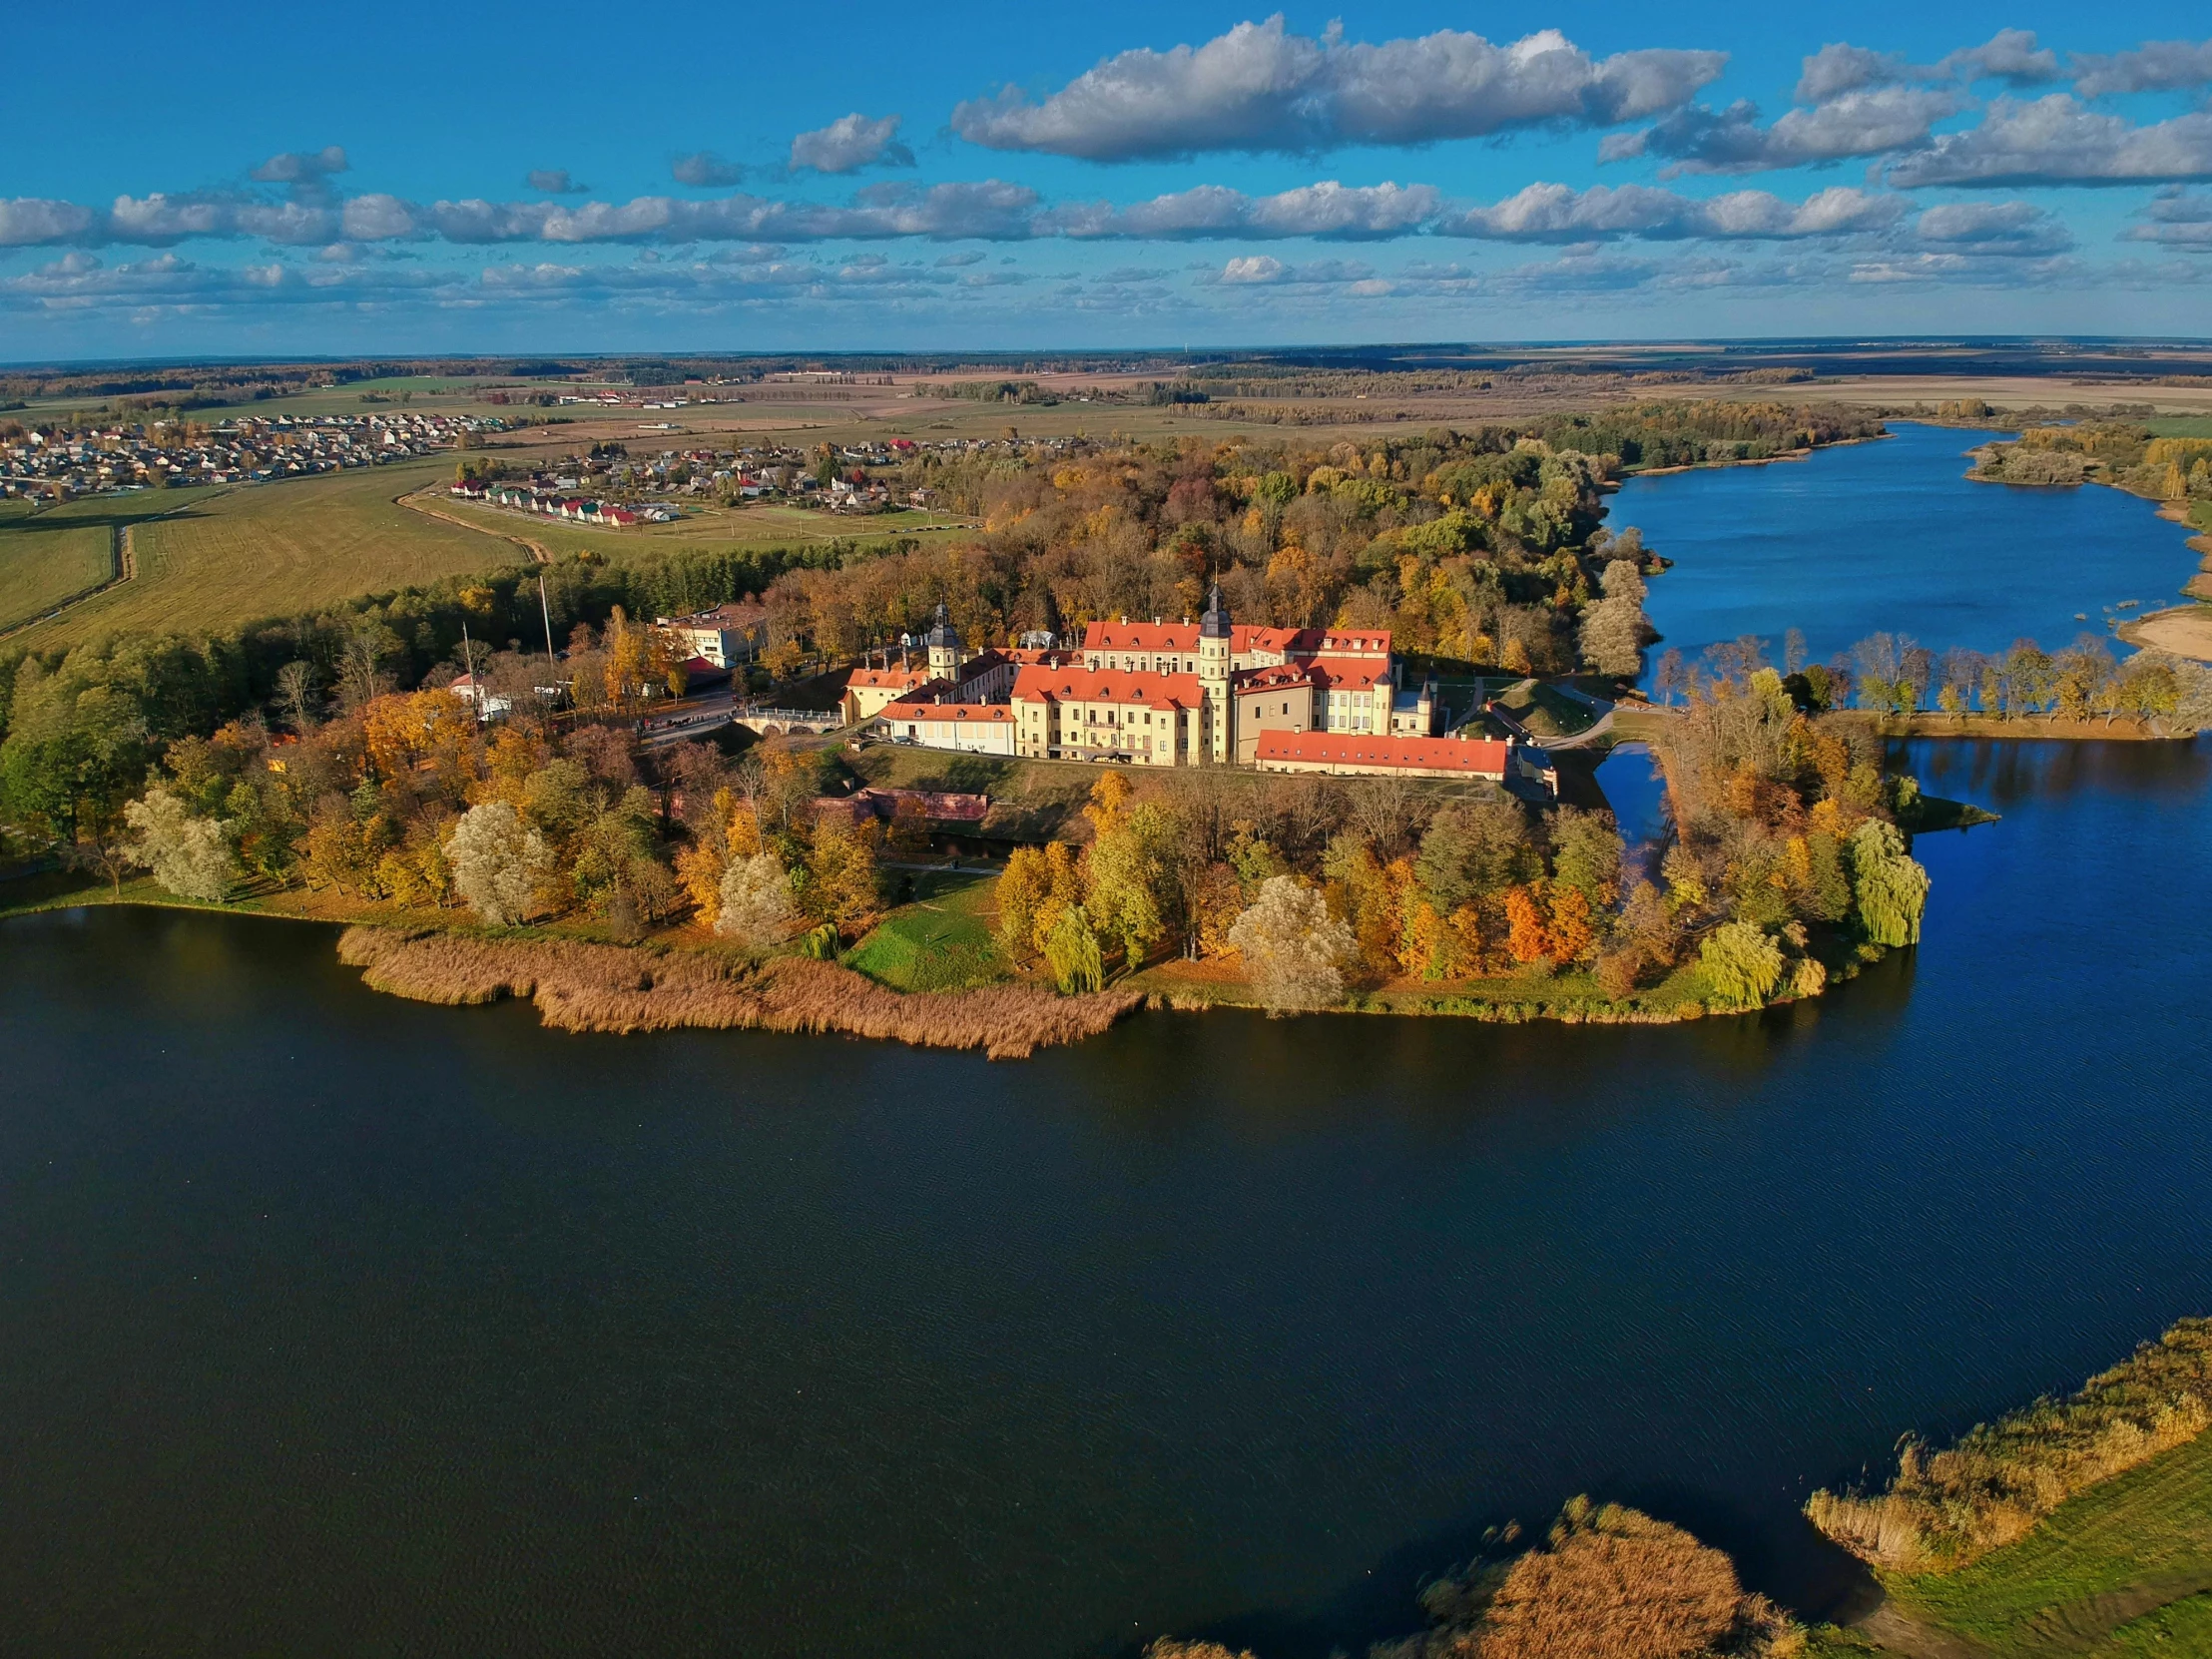 the aerial view of the estate on a lake